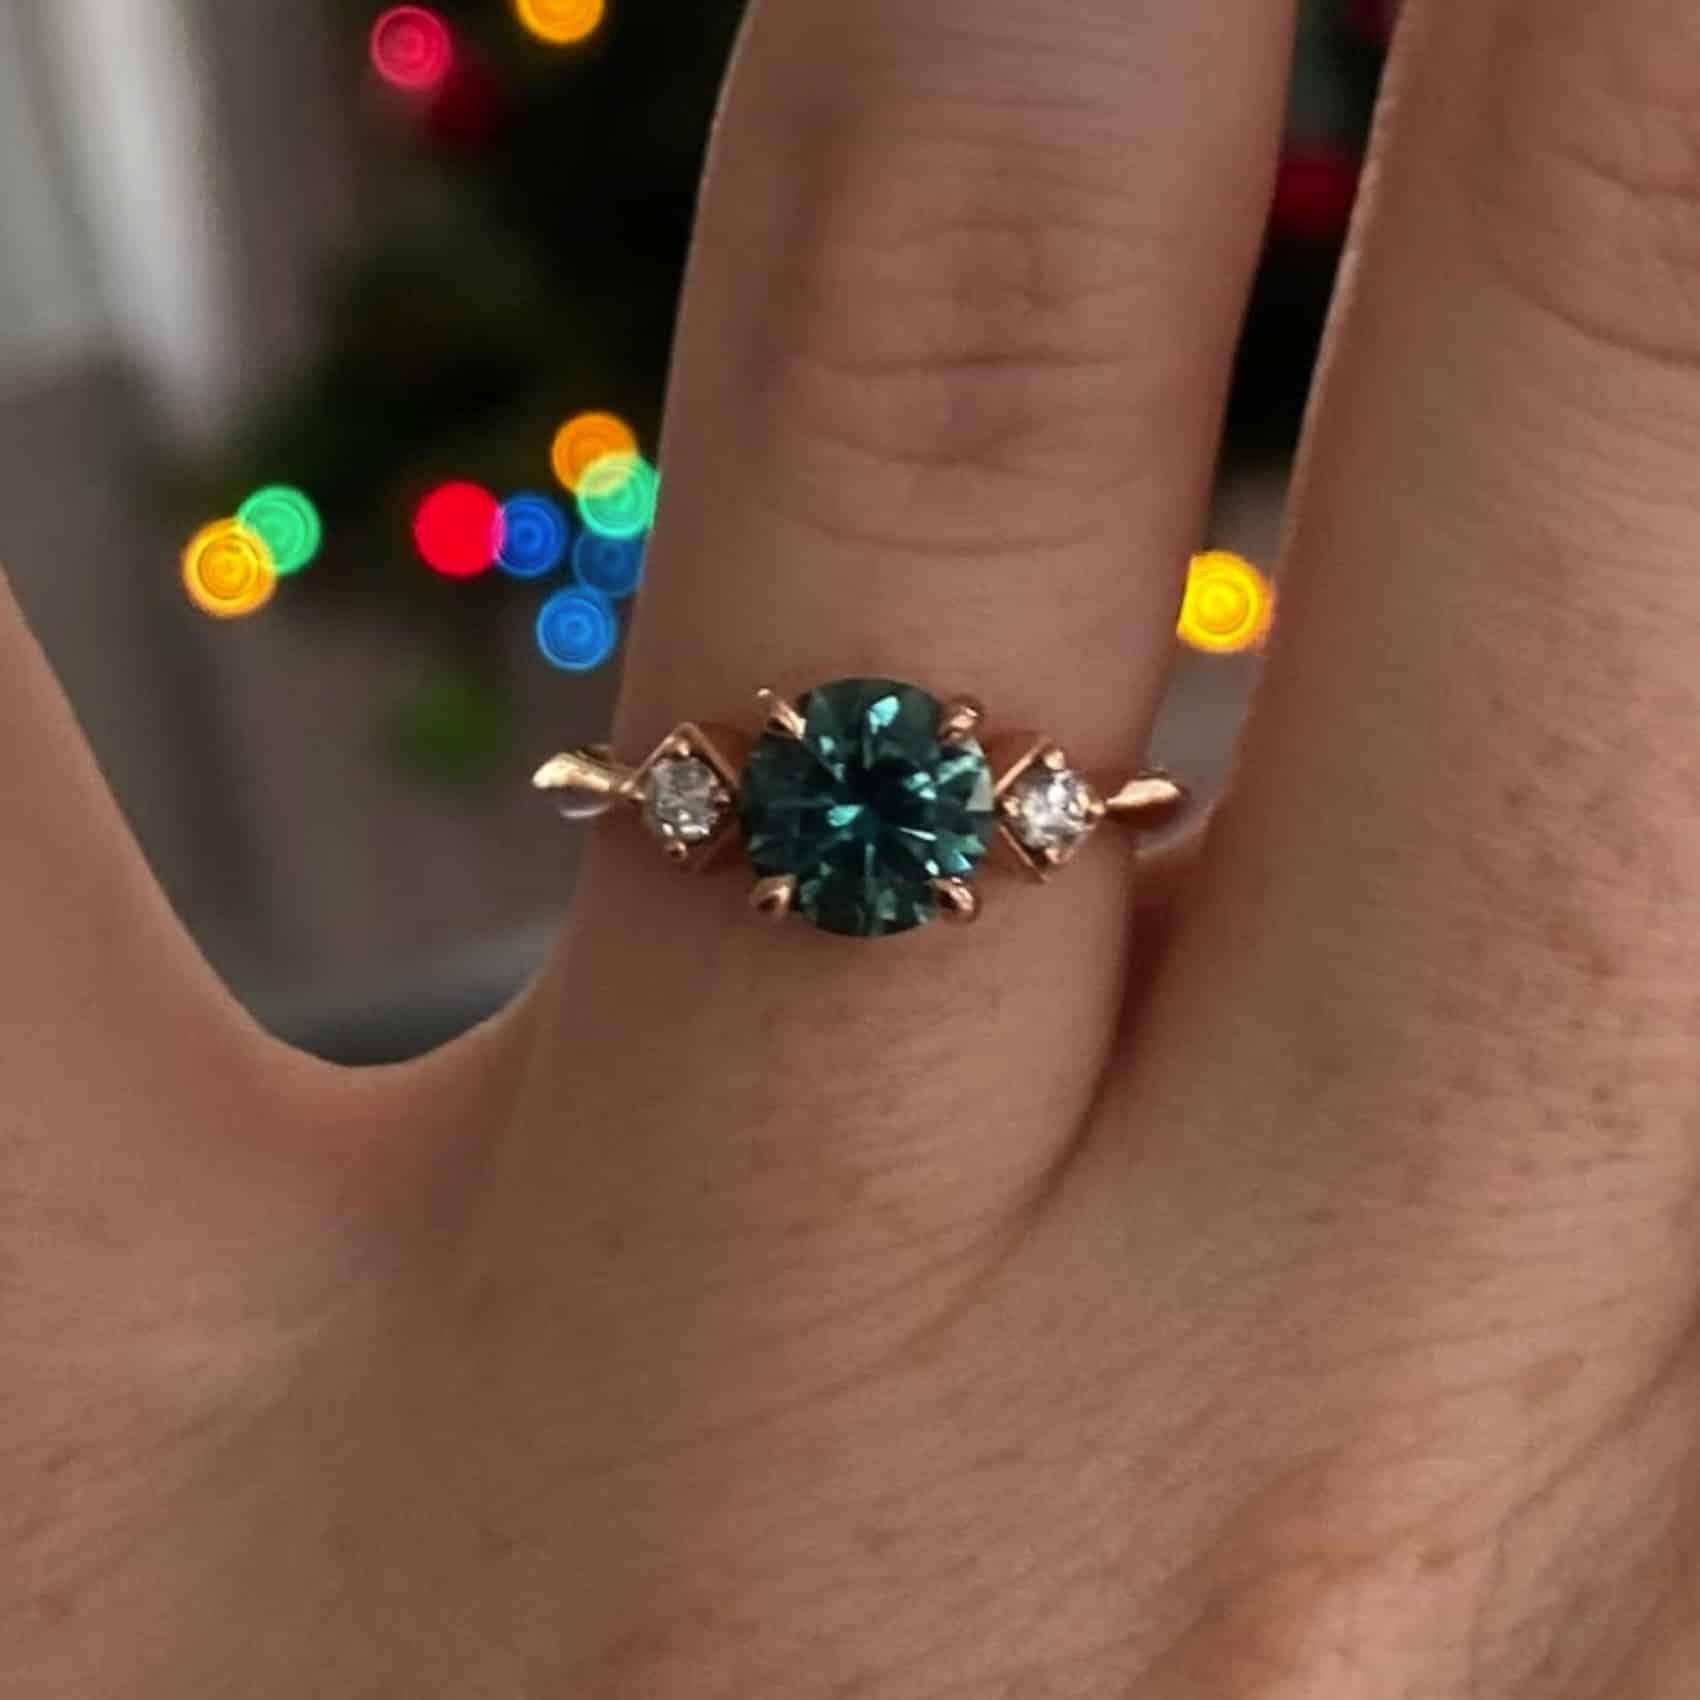 A photo from a customer review of a rose gold "Harmonia" ring with a green-teal round sapphire on a hand against twinkling Christmas lights.